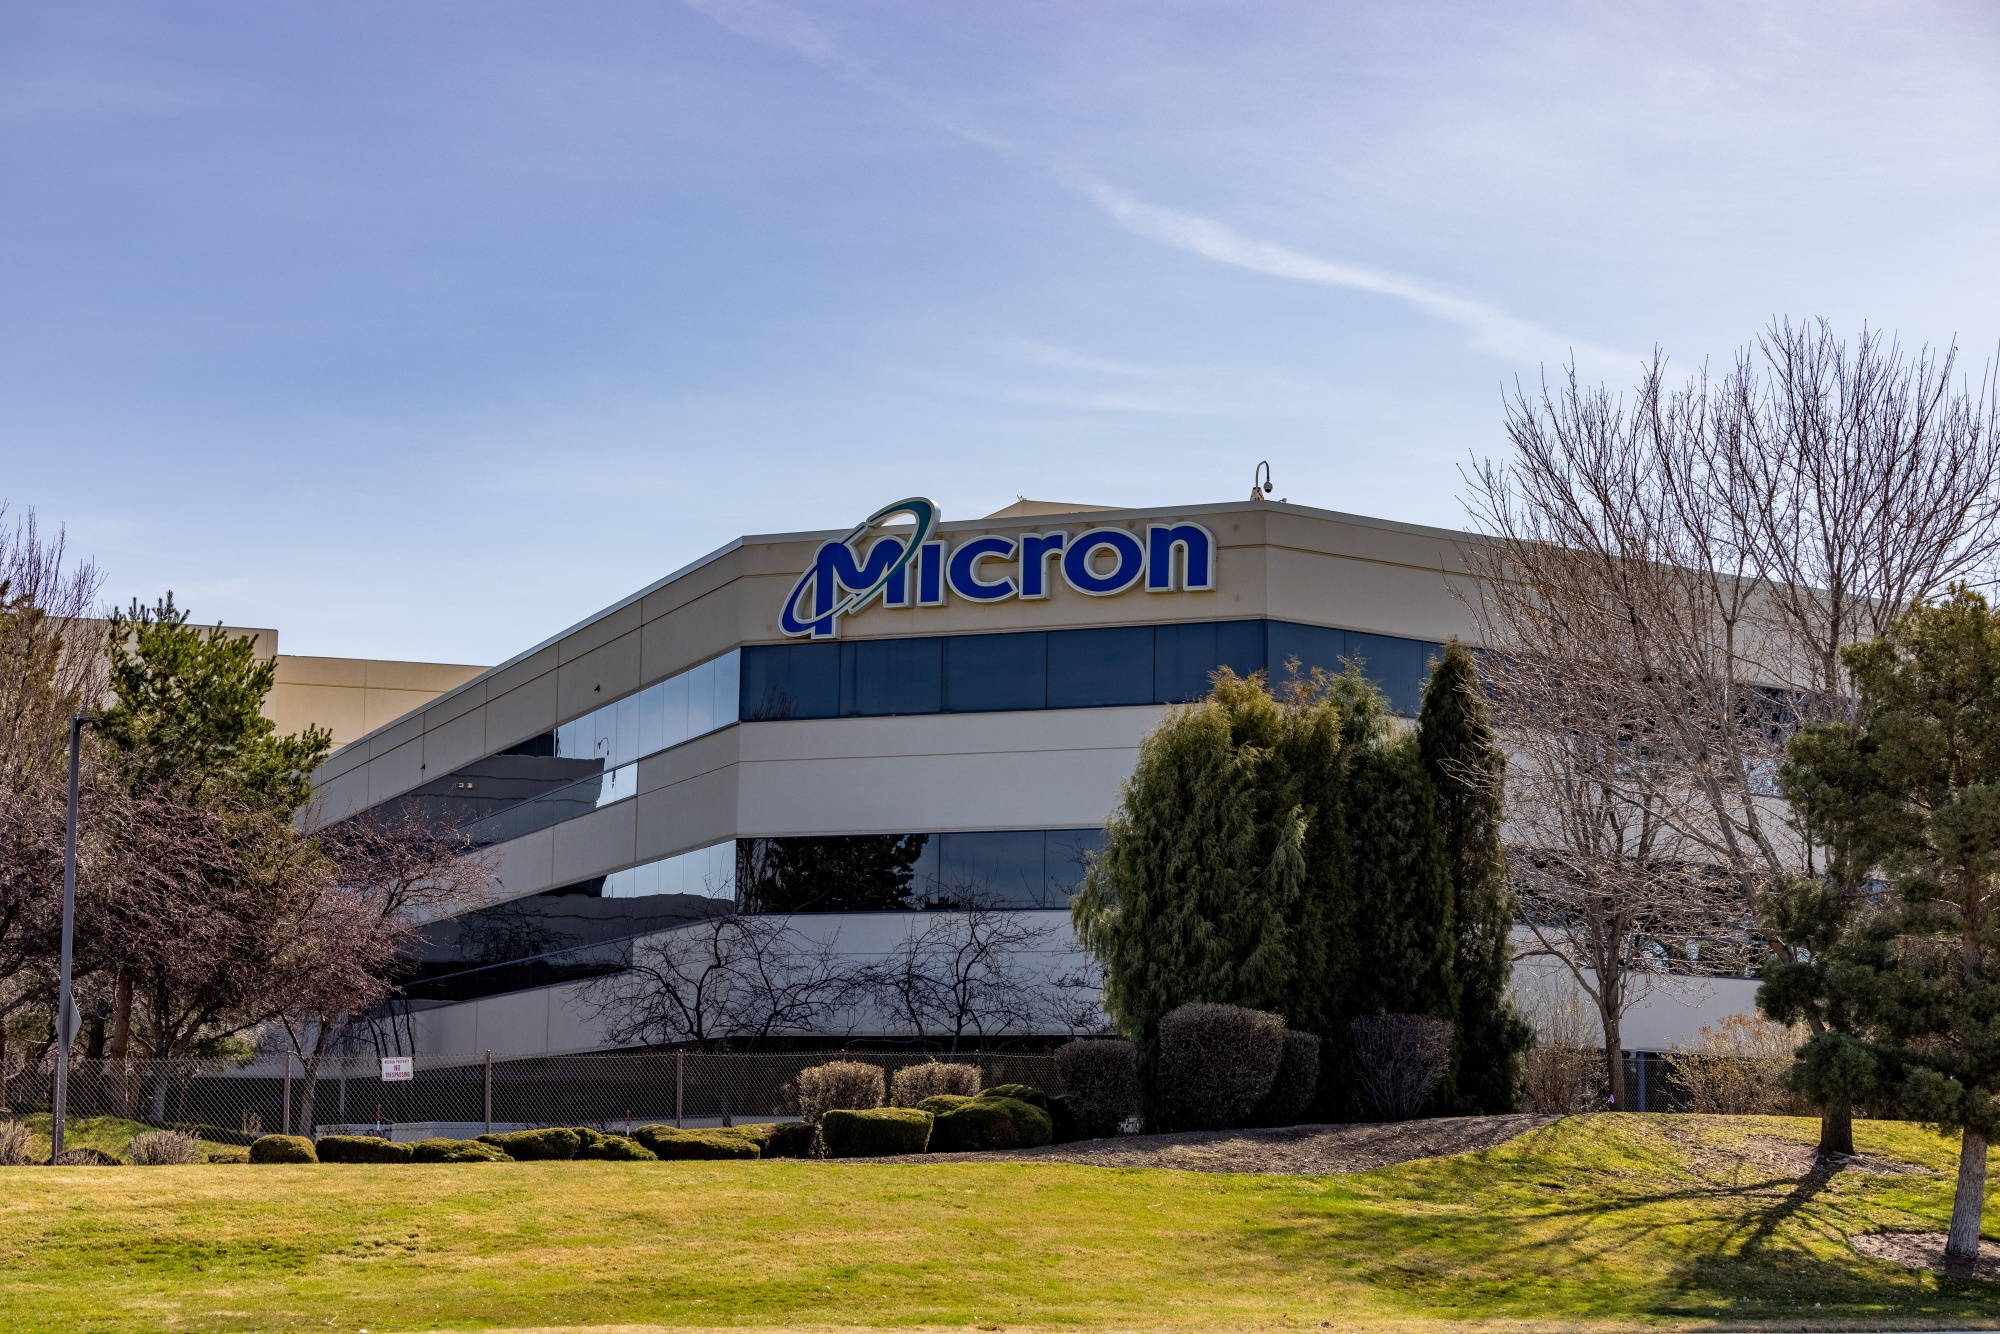 Micron Catalyses India's Chip Hopes For A Huge Boost, But A Ground-Up Facility Remains Mysterious.